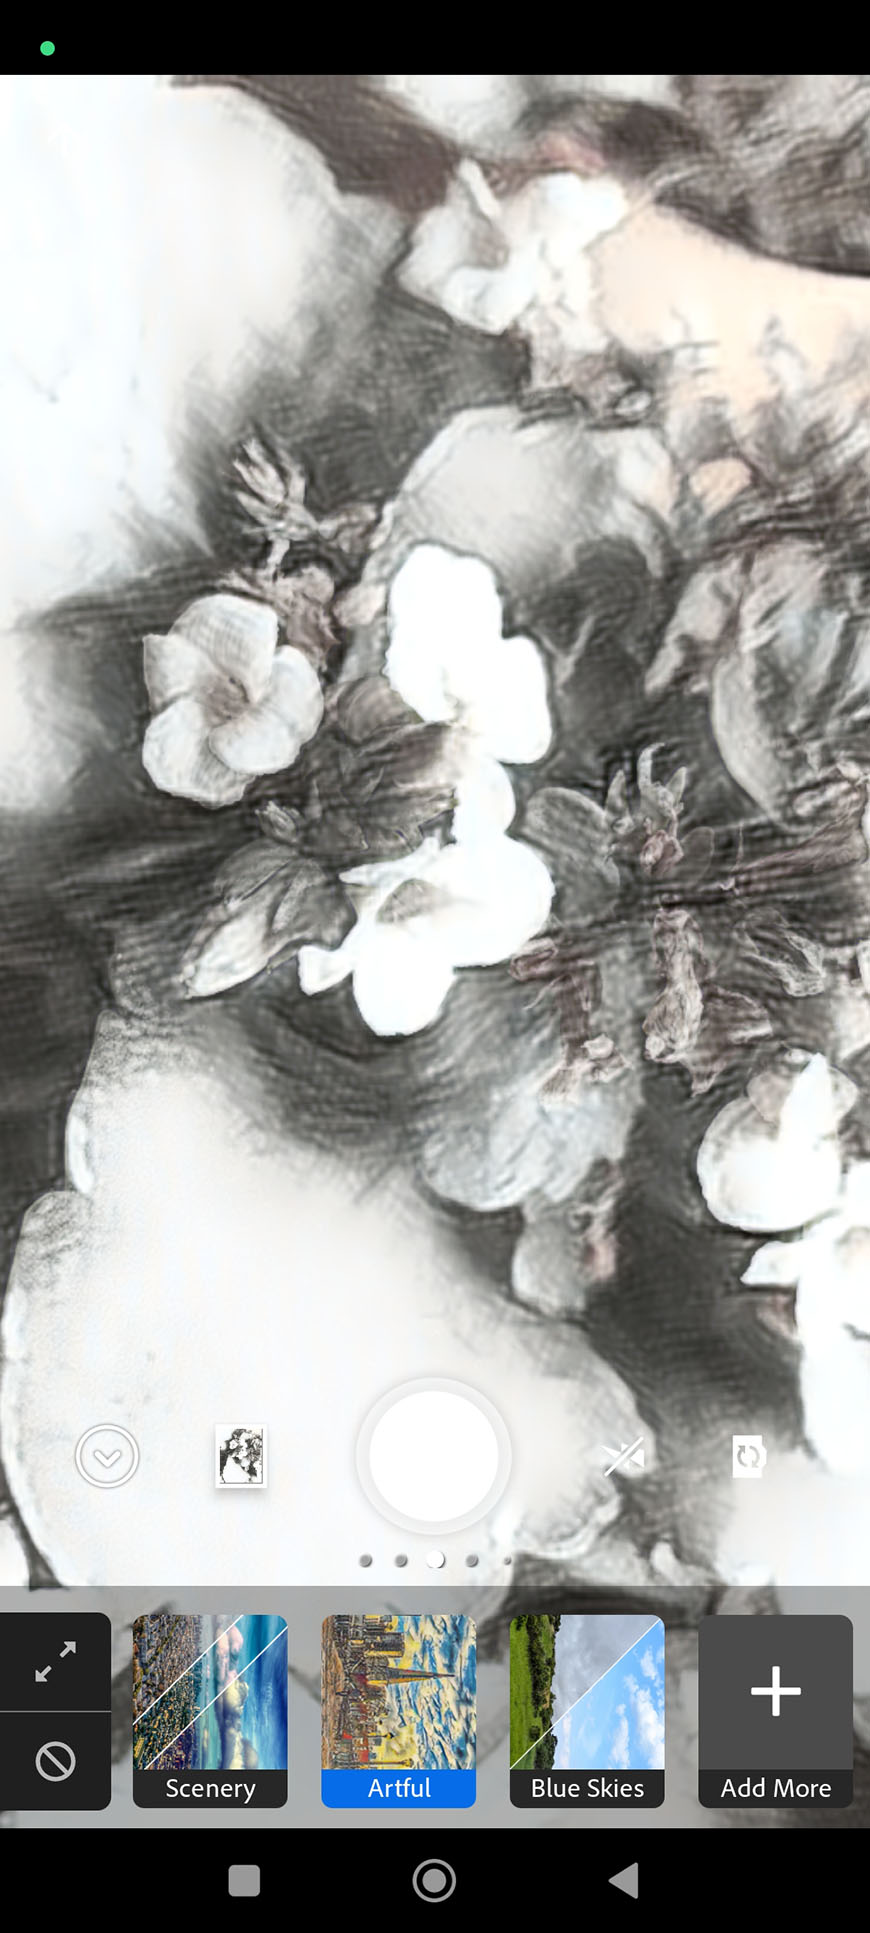 A smartphone screen displaying a filter selection interface with an image of flowers in an artful monochromatic style.